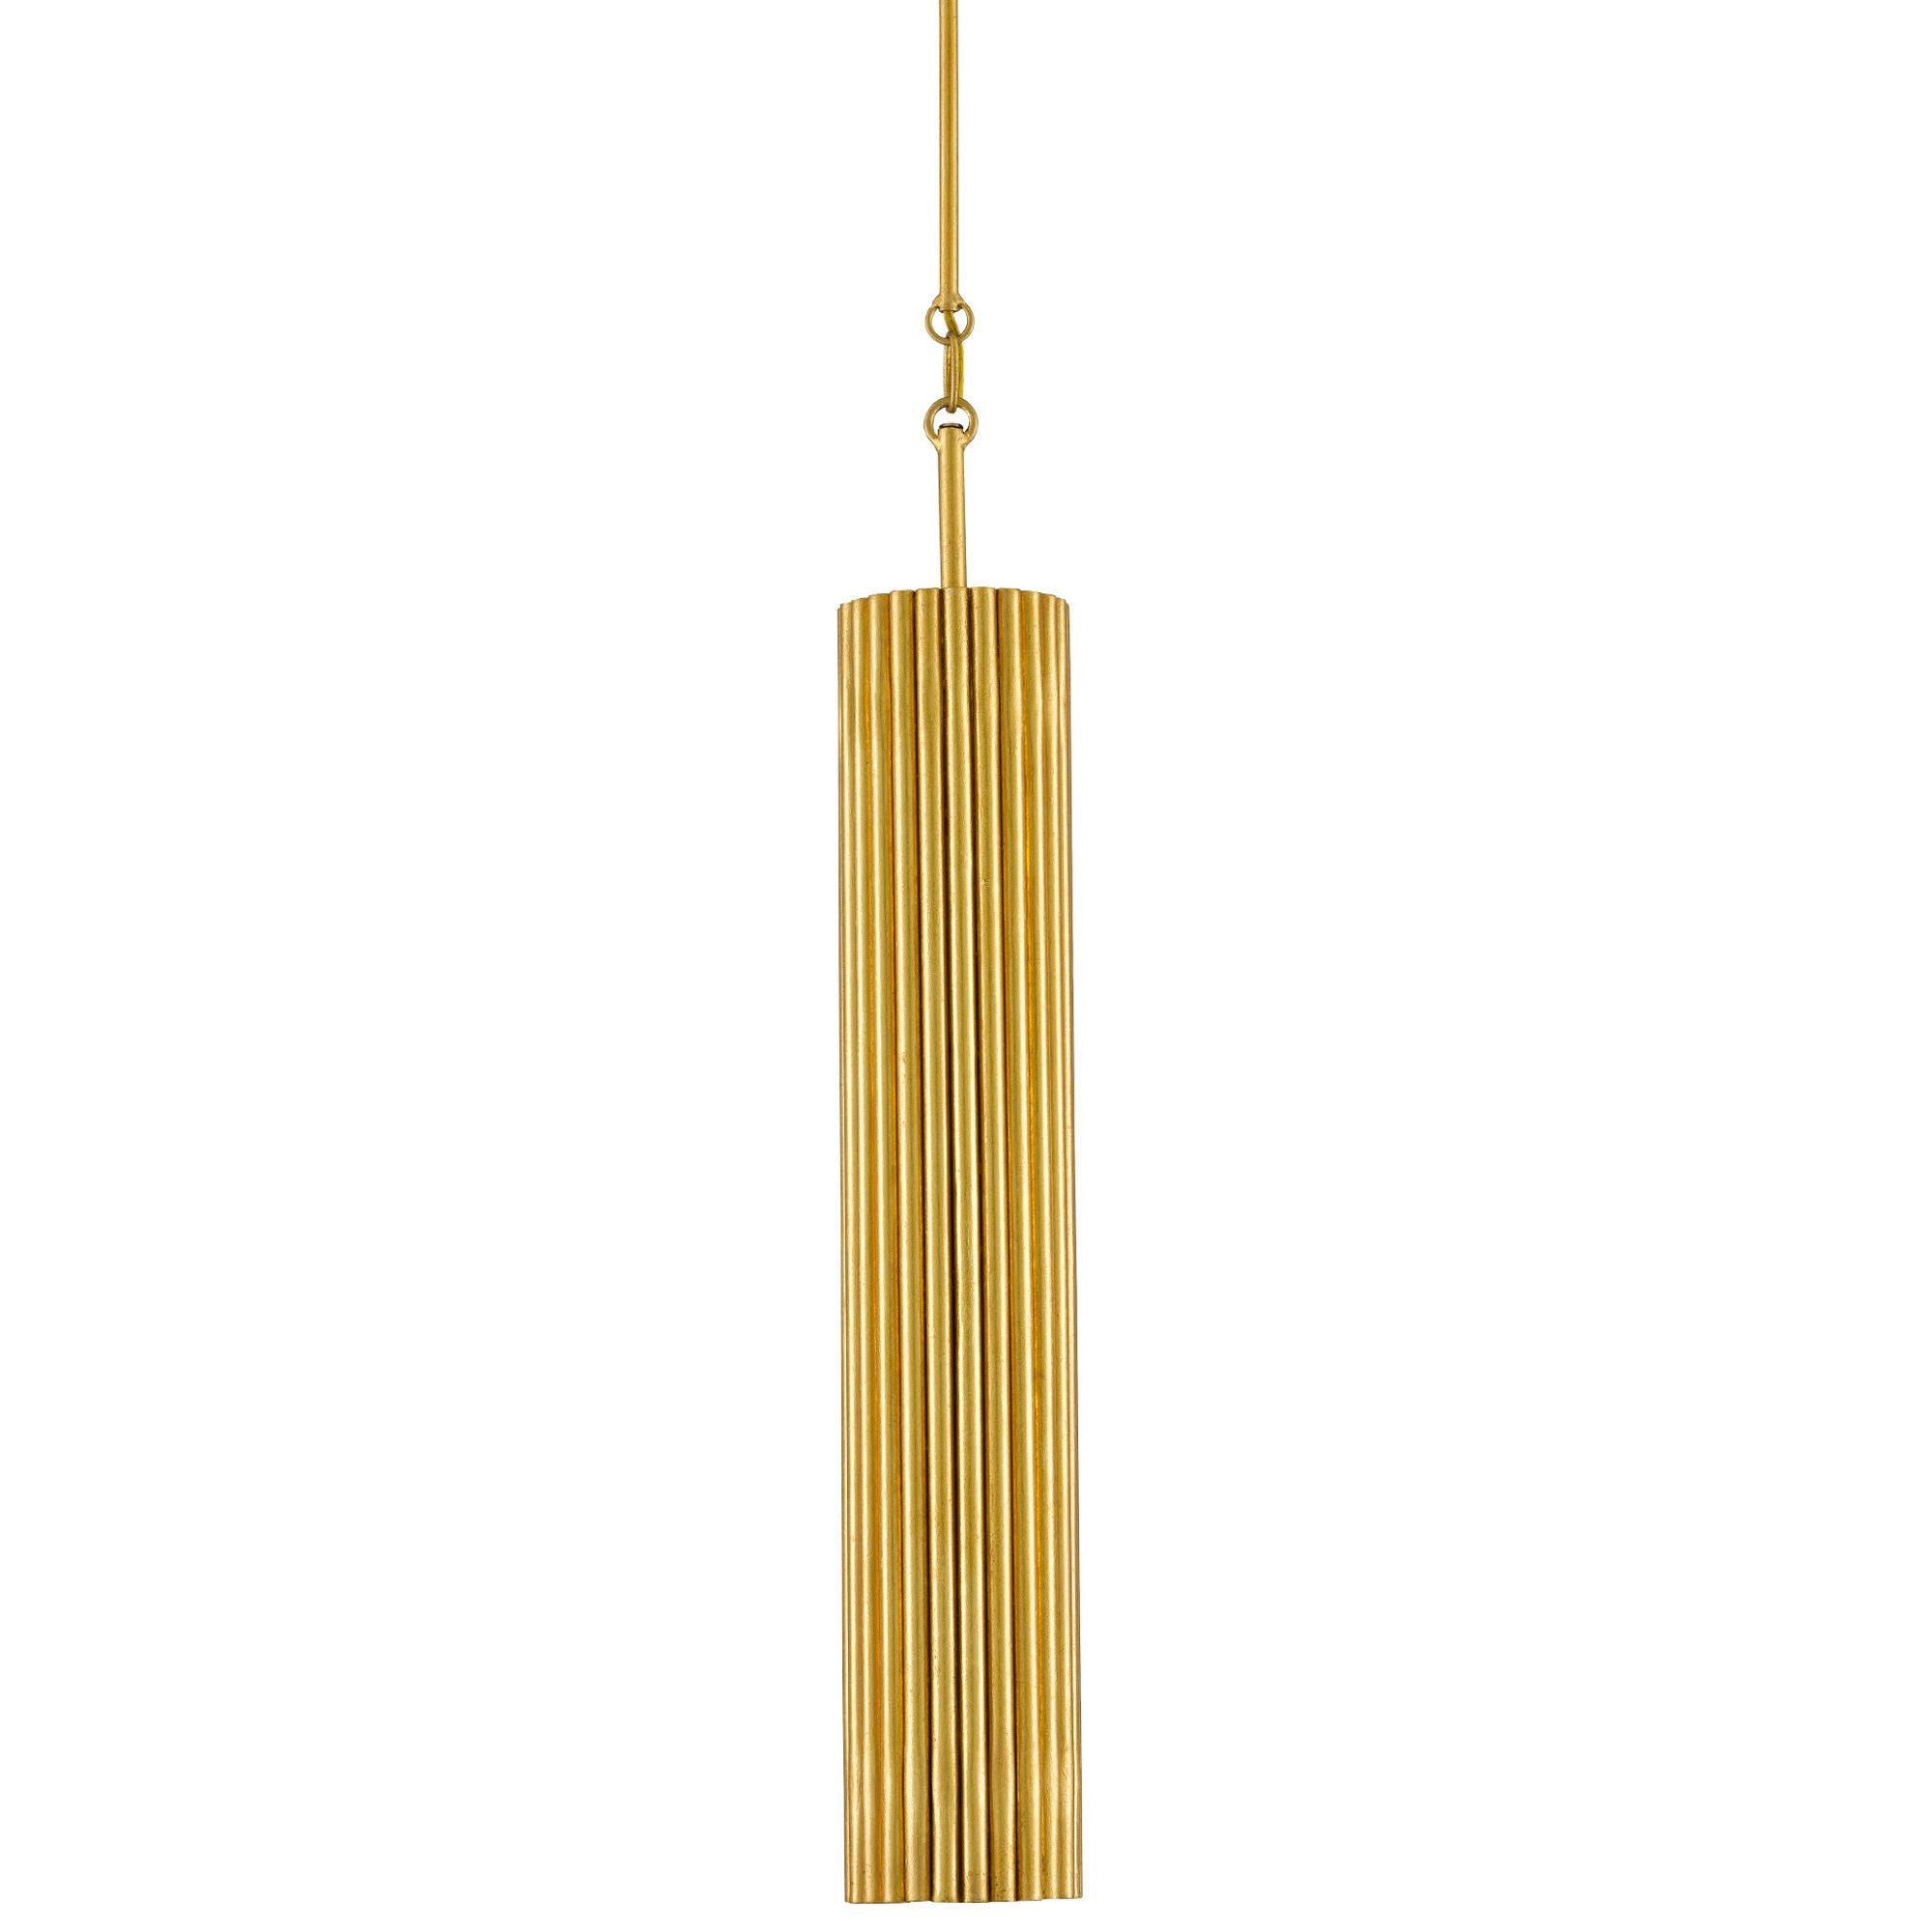 Penfold Gold Pendant - Contemporary Gold Leaf/Painted Contemporary Gold